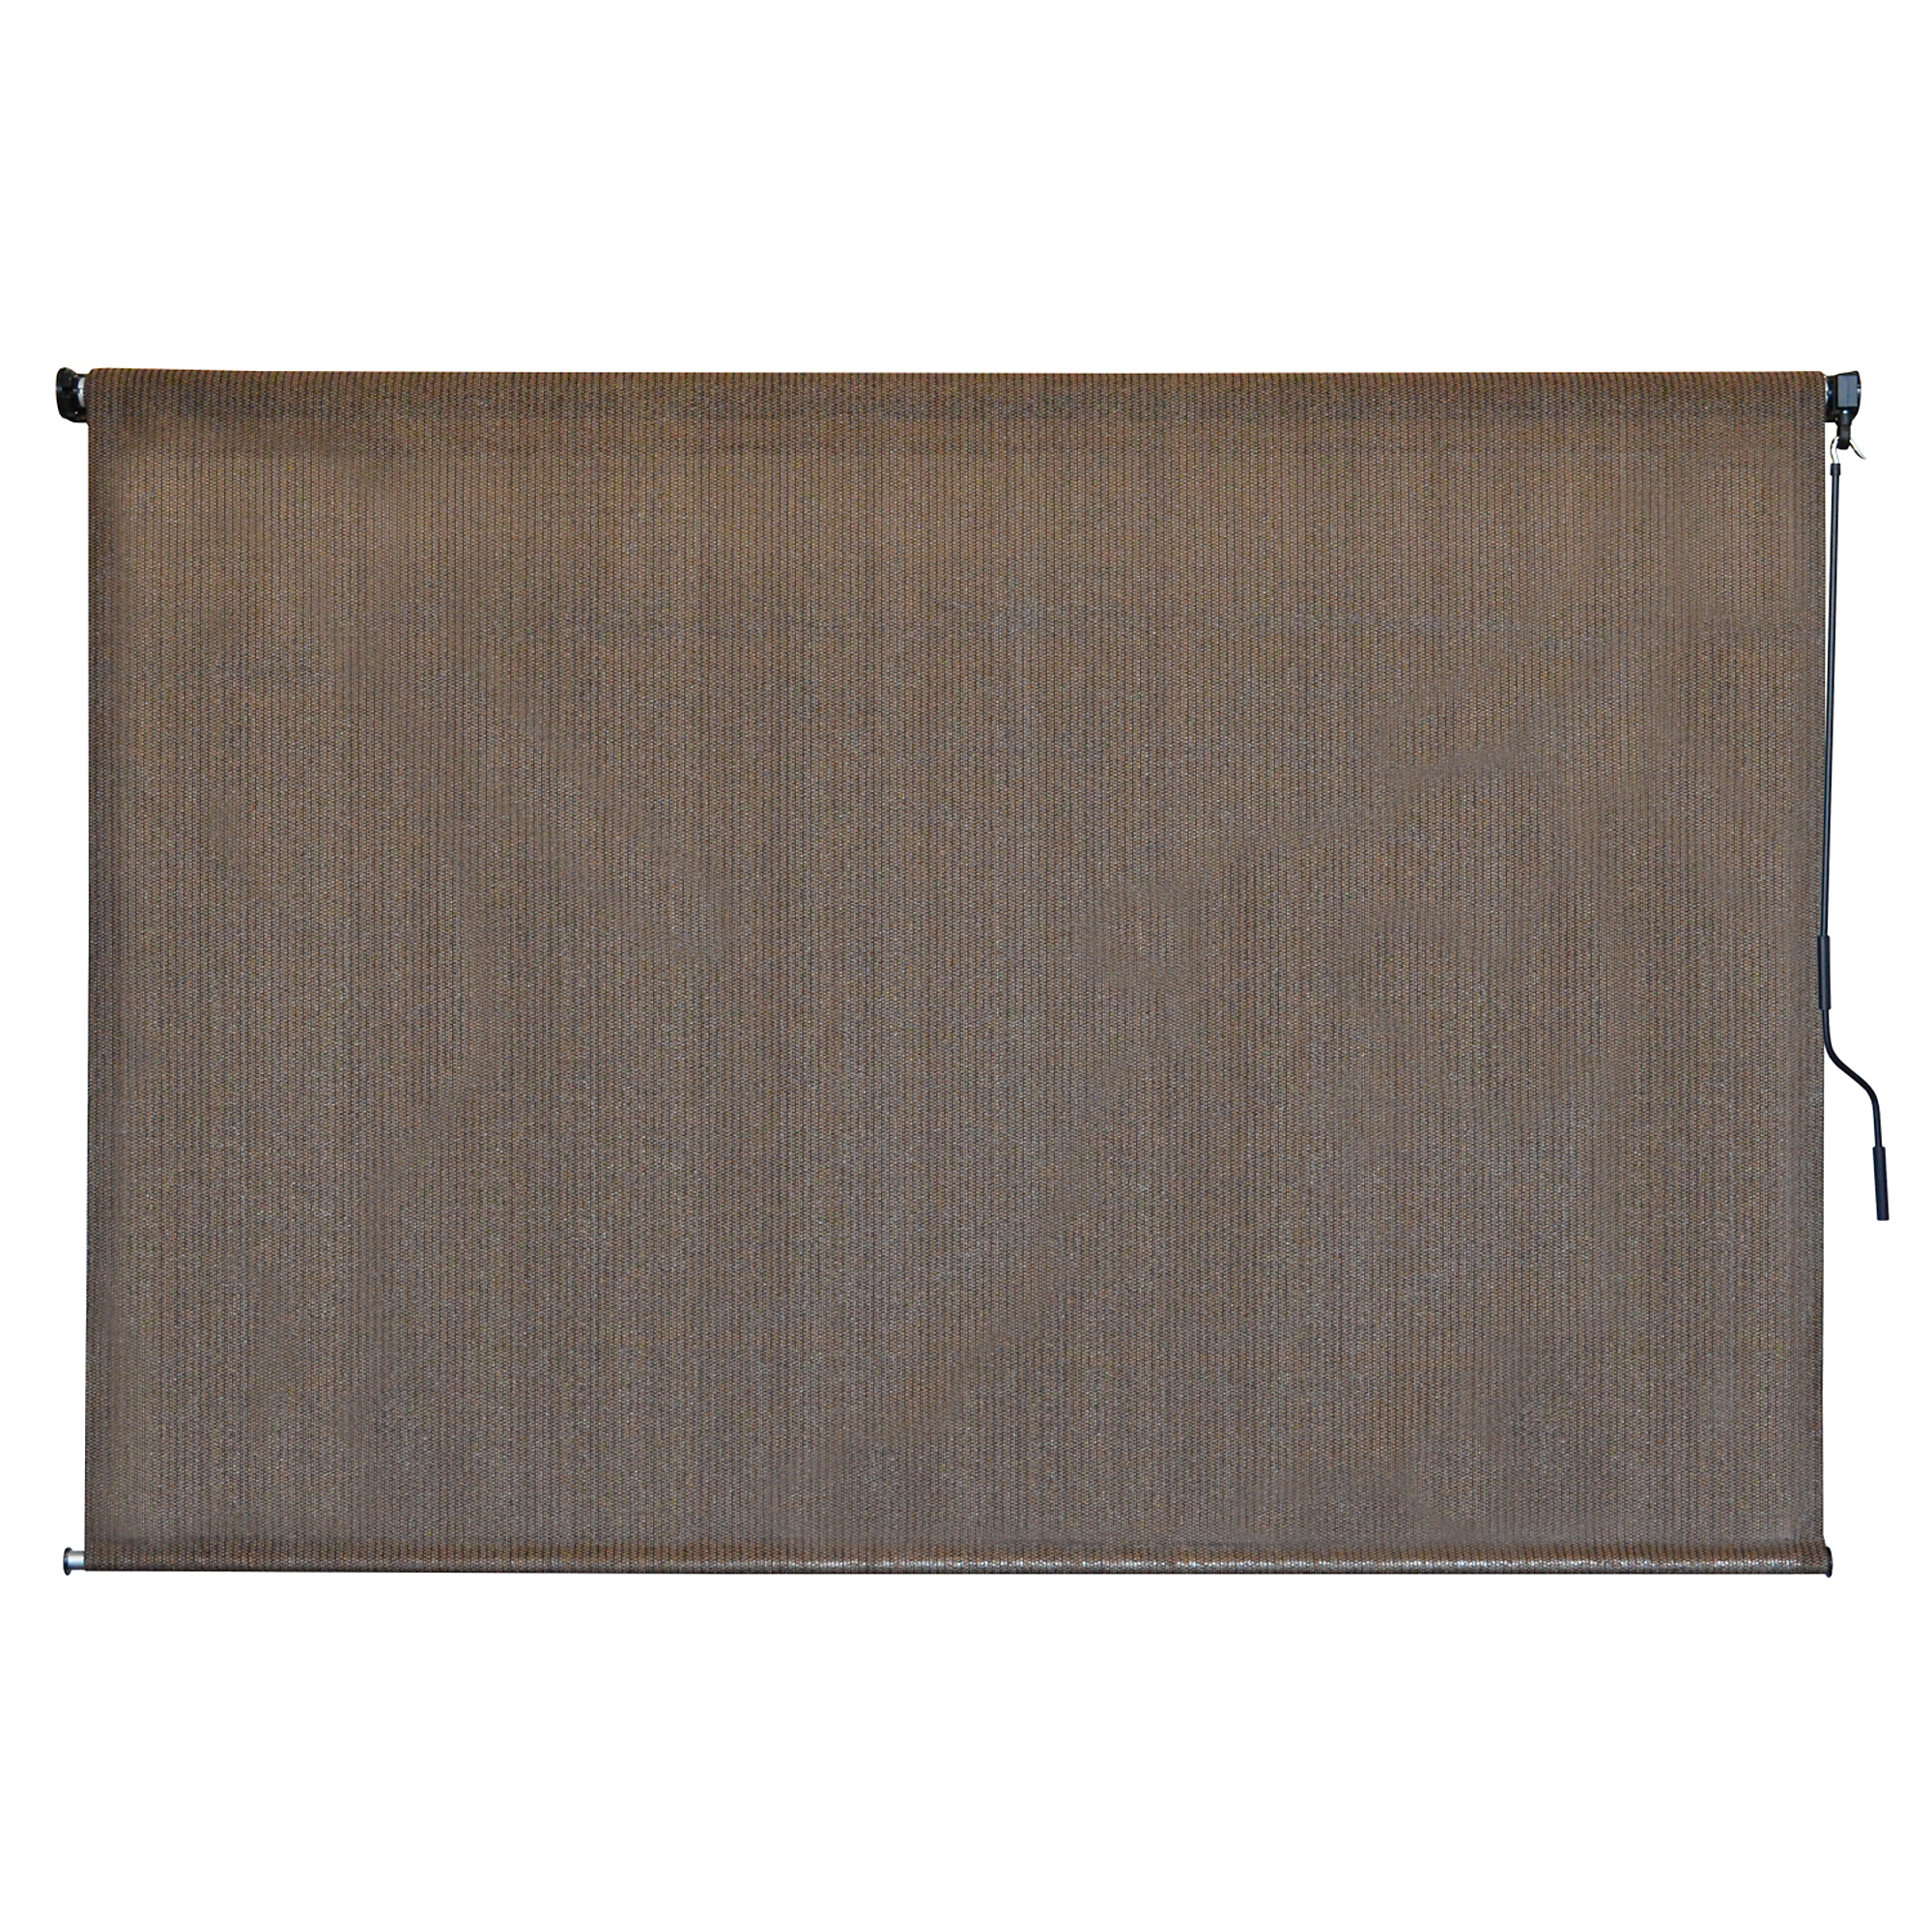 Shade Champ, Outdoor Sun Shade, Width 48 in, Length 72 in, Material Polyethylene, Model 20NT46